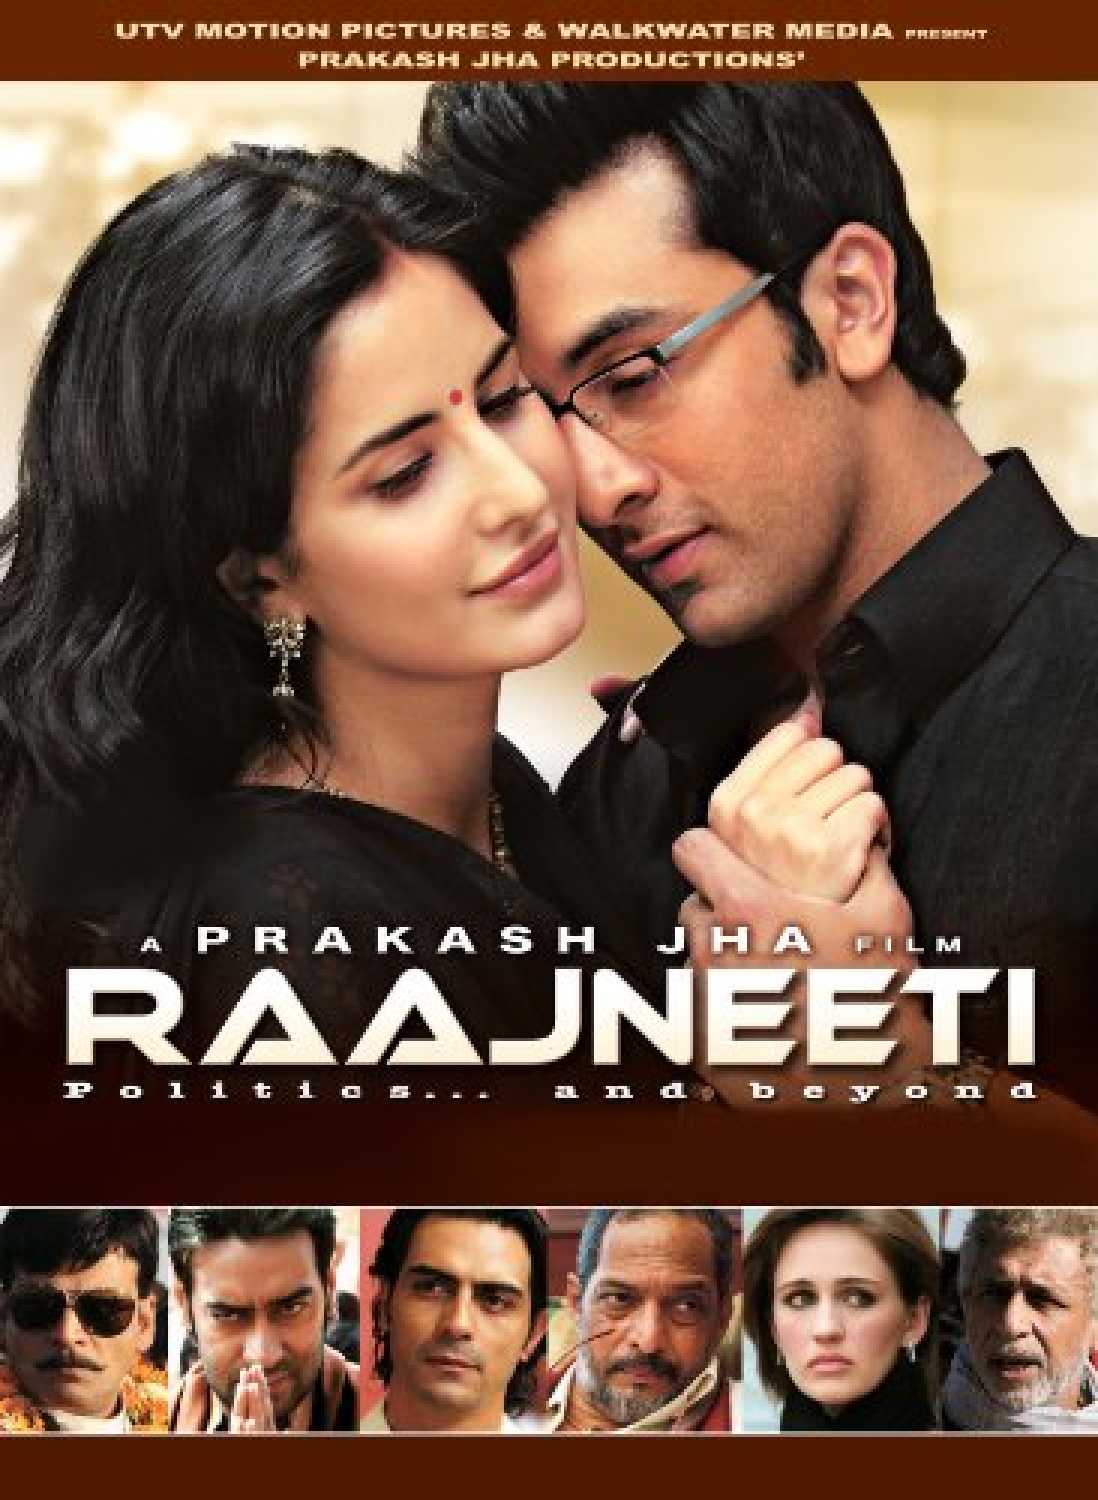 Which Hollywood actress did appear in Bollywood movie, Raajneeti (2010)?